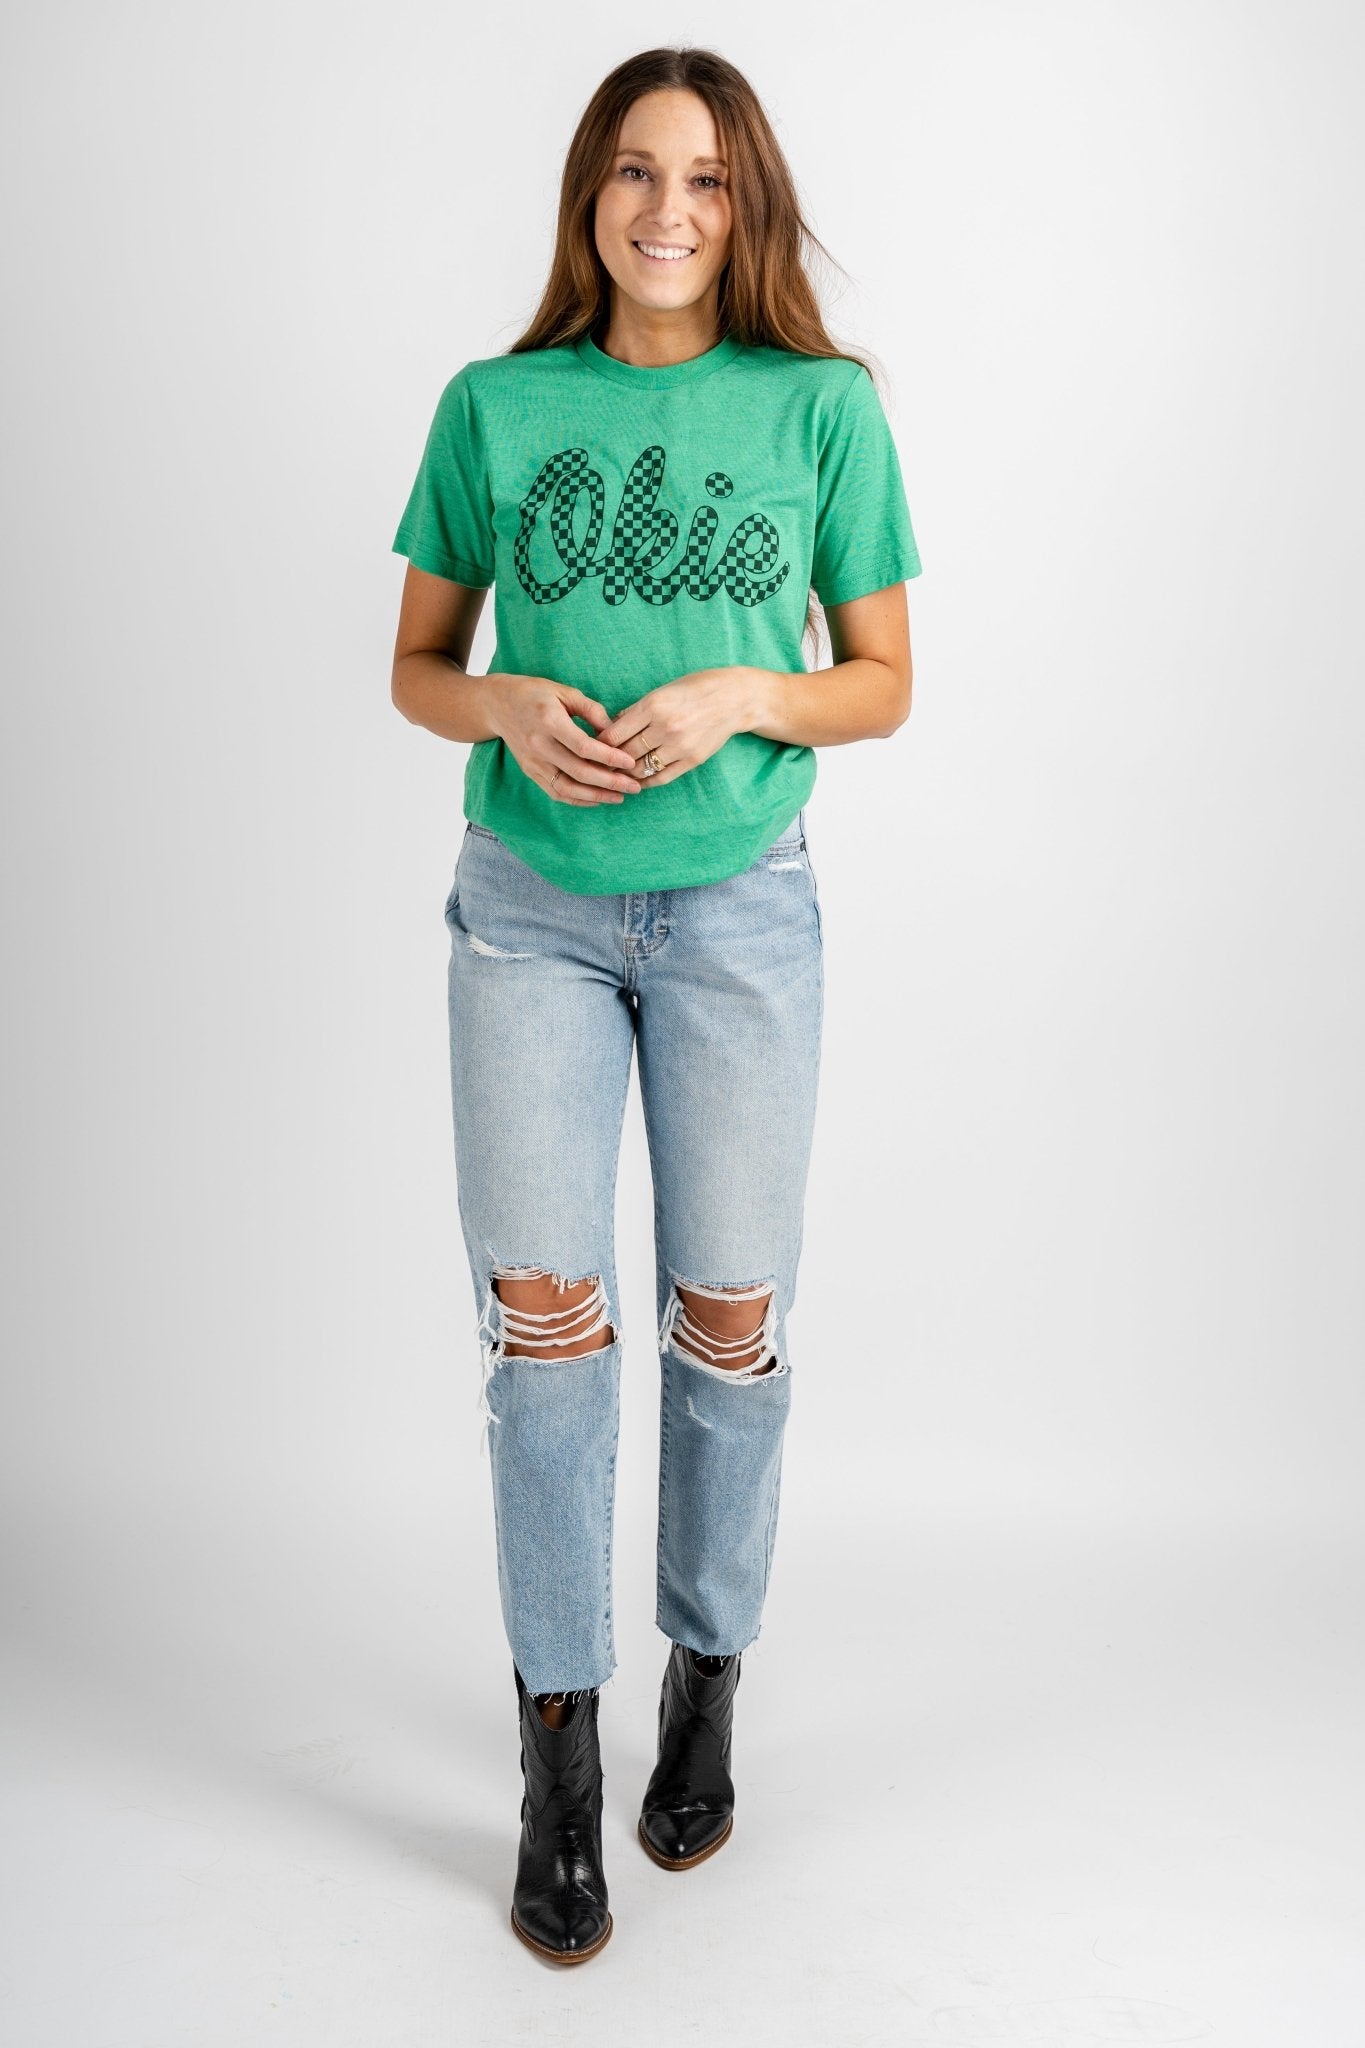 Okie checkered t-shirt green - Cute St. Patrick's Day Outfits at Lush Fashion Lounge Boutique in Oklahoma City